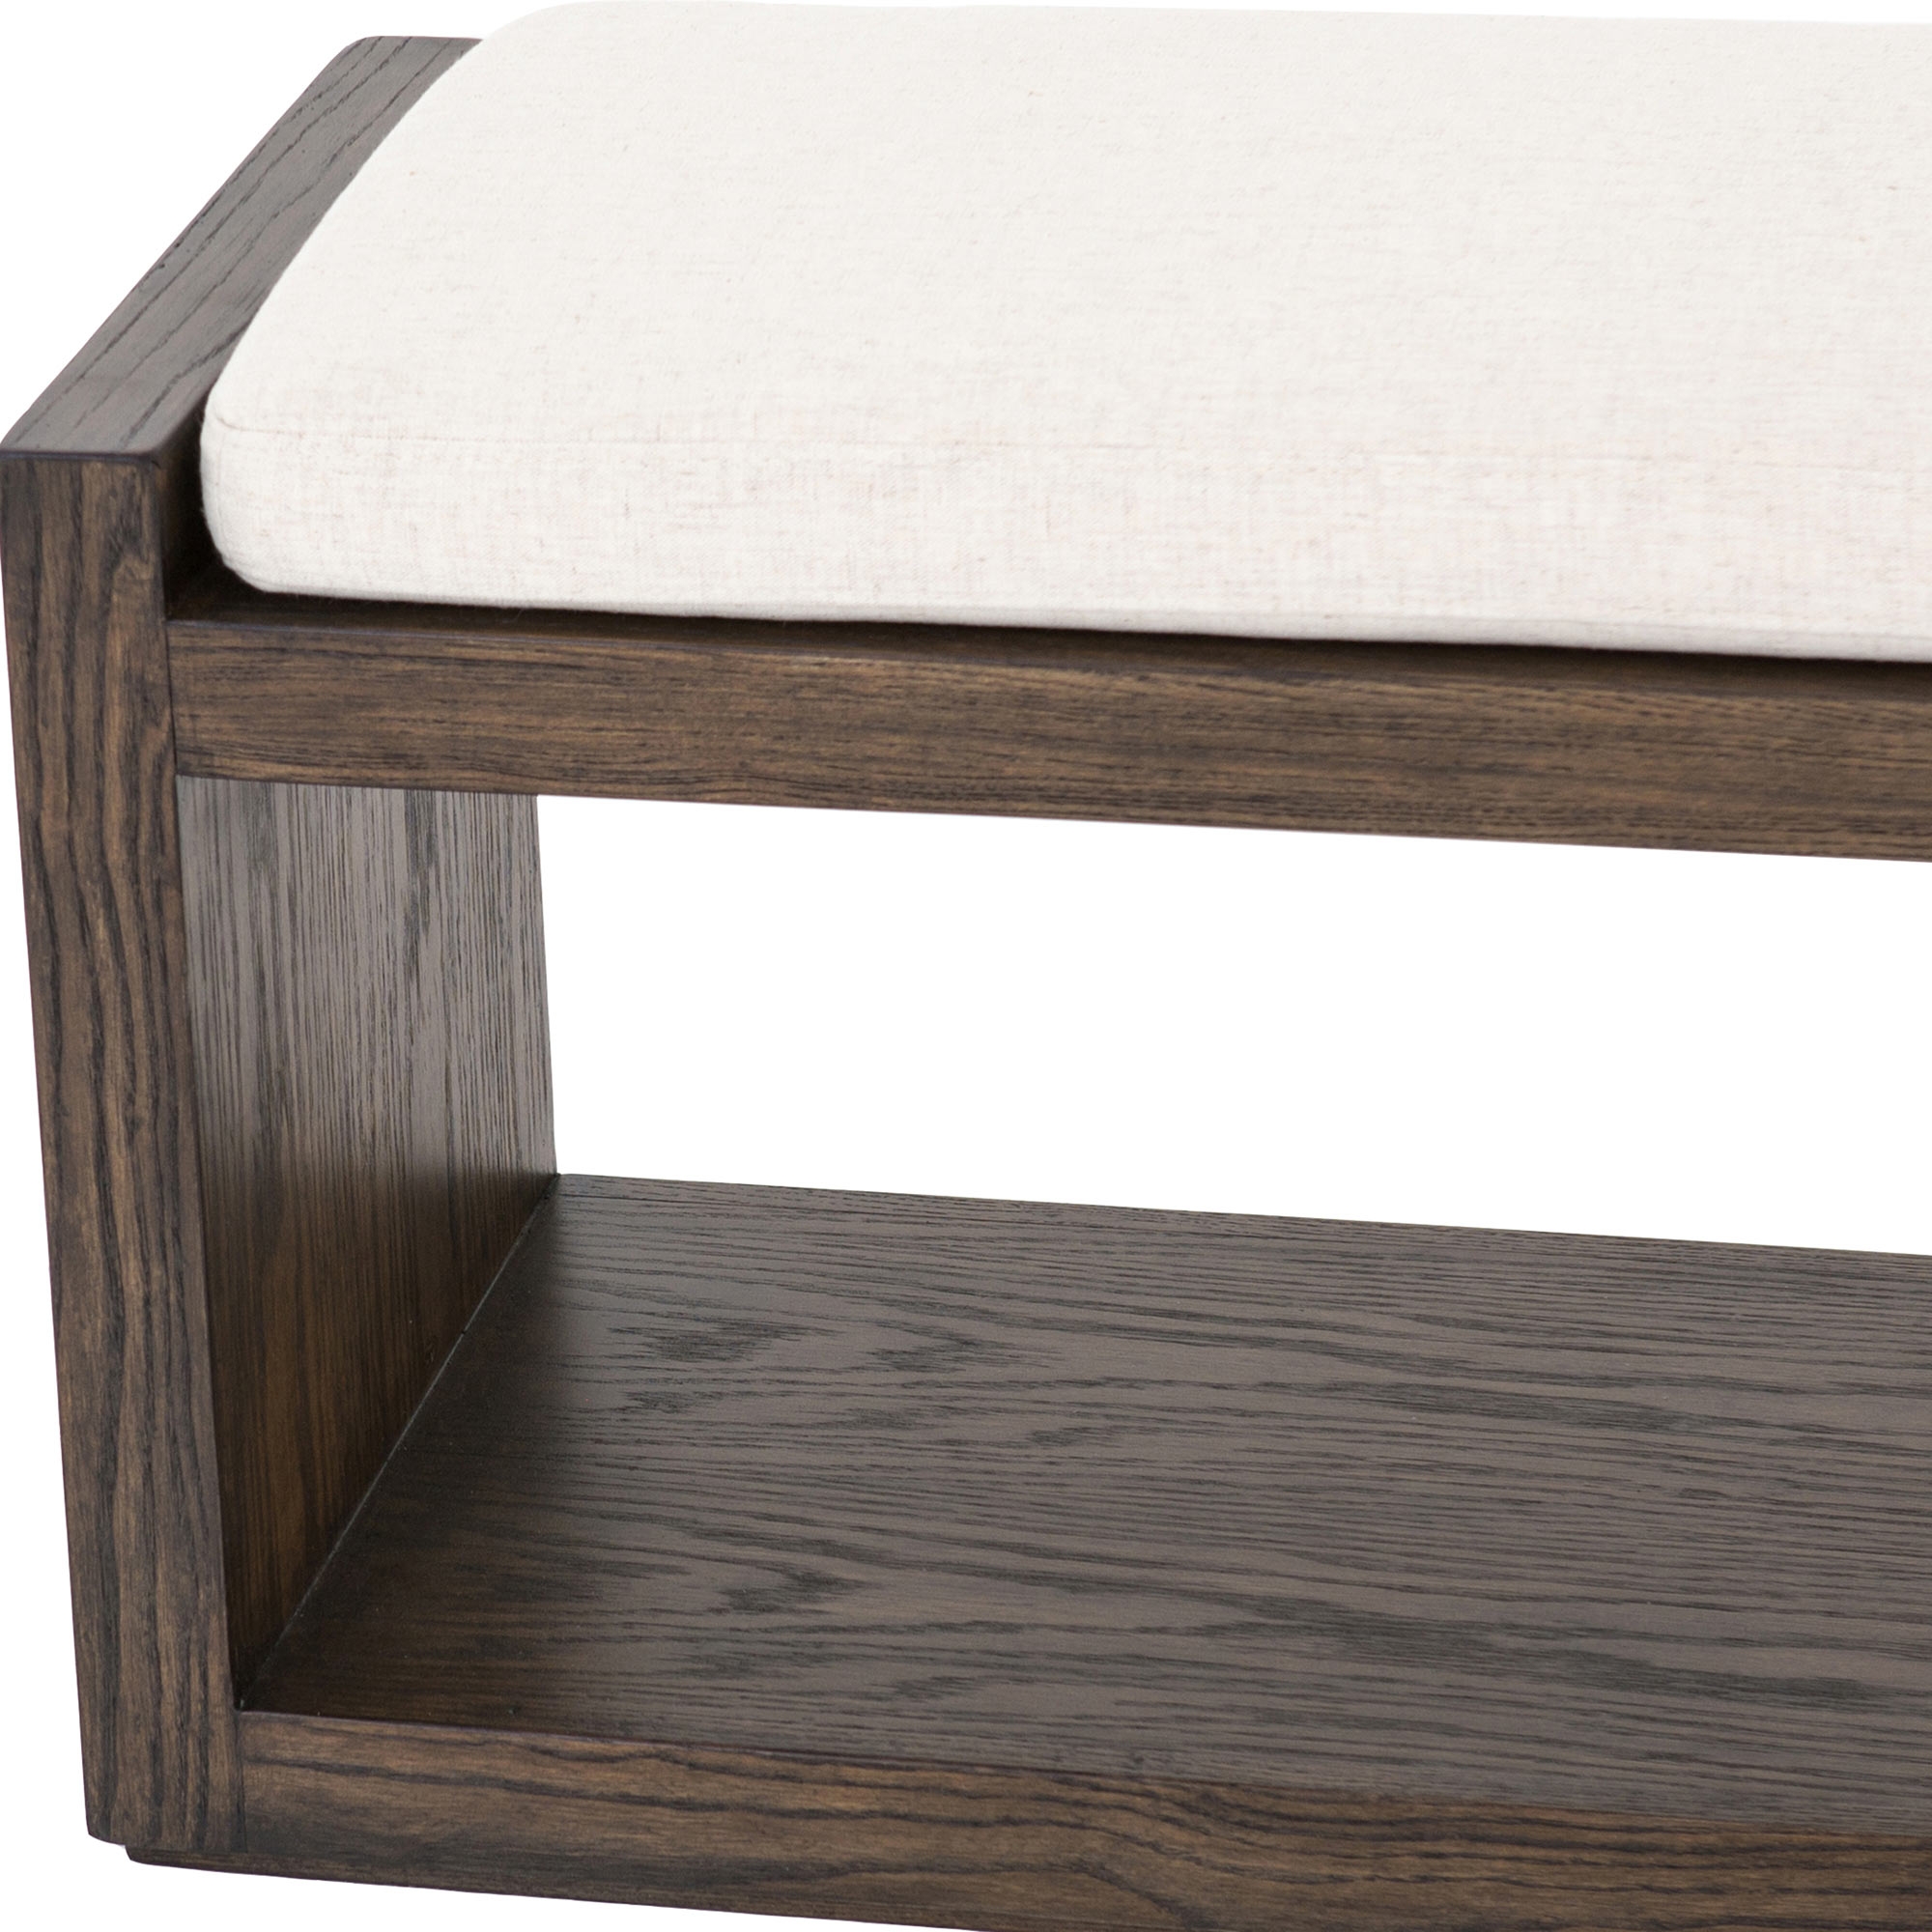 Emma Modern Classic White Cushion Solid Brown Wood Frame Bench - Image 6